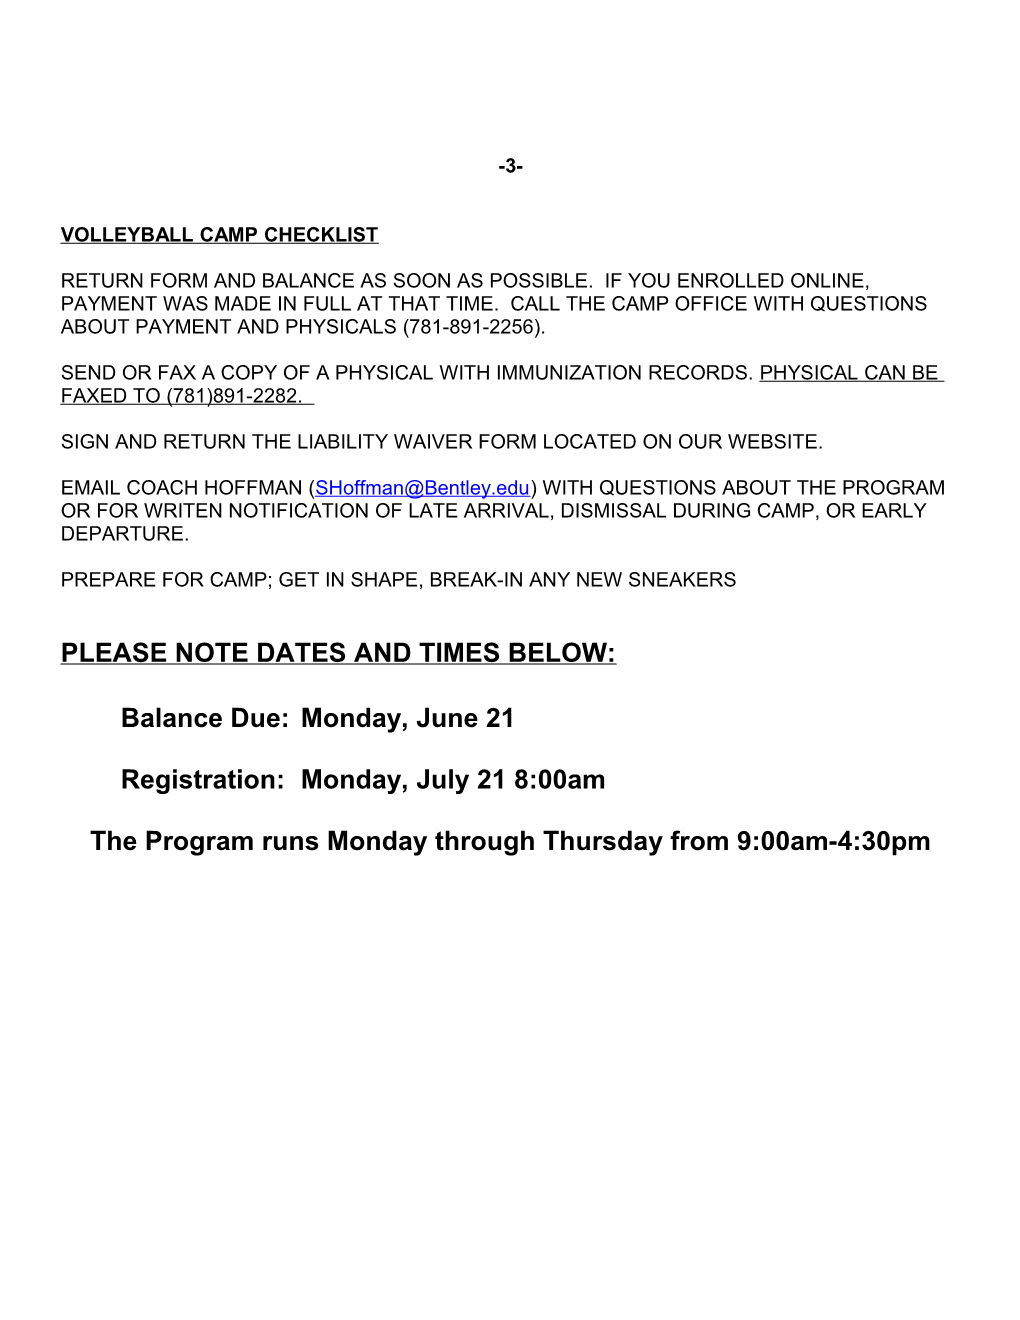 Many Thanks for Enrolling Your Child in Our 2014 New England All Star Volleyball Camp Here